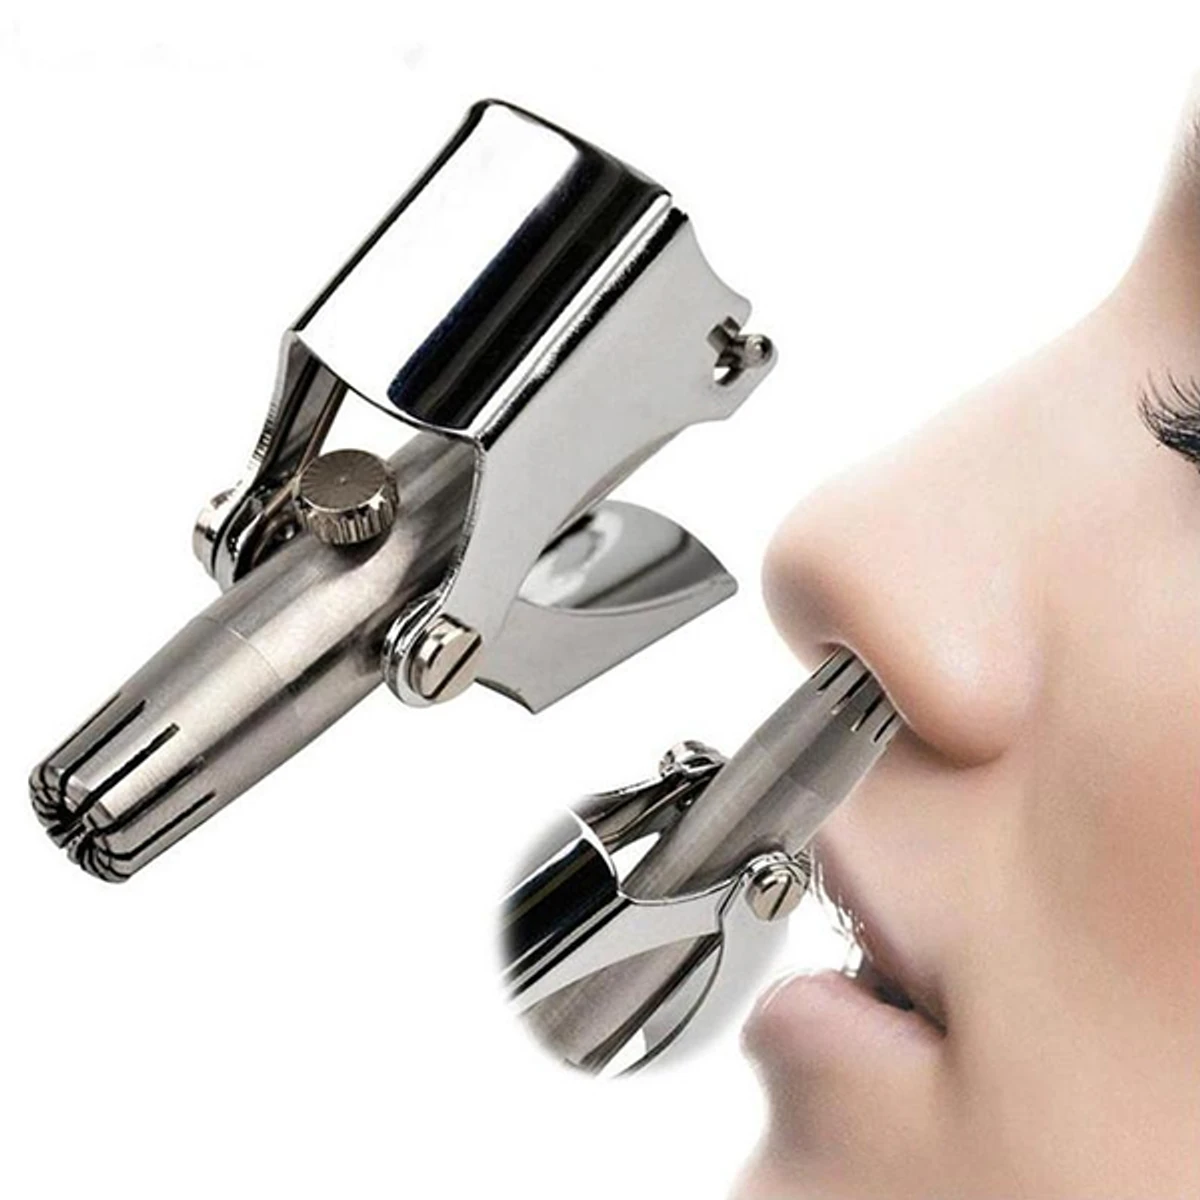 Manual Nose Hair Trimmer with Metal Box for Men